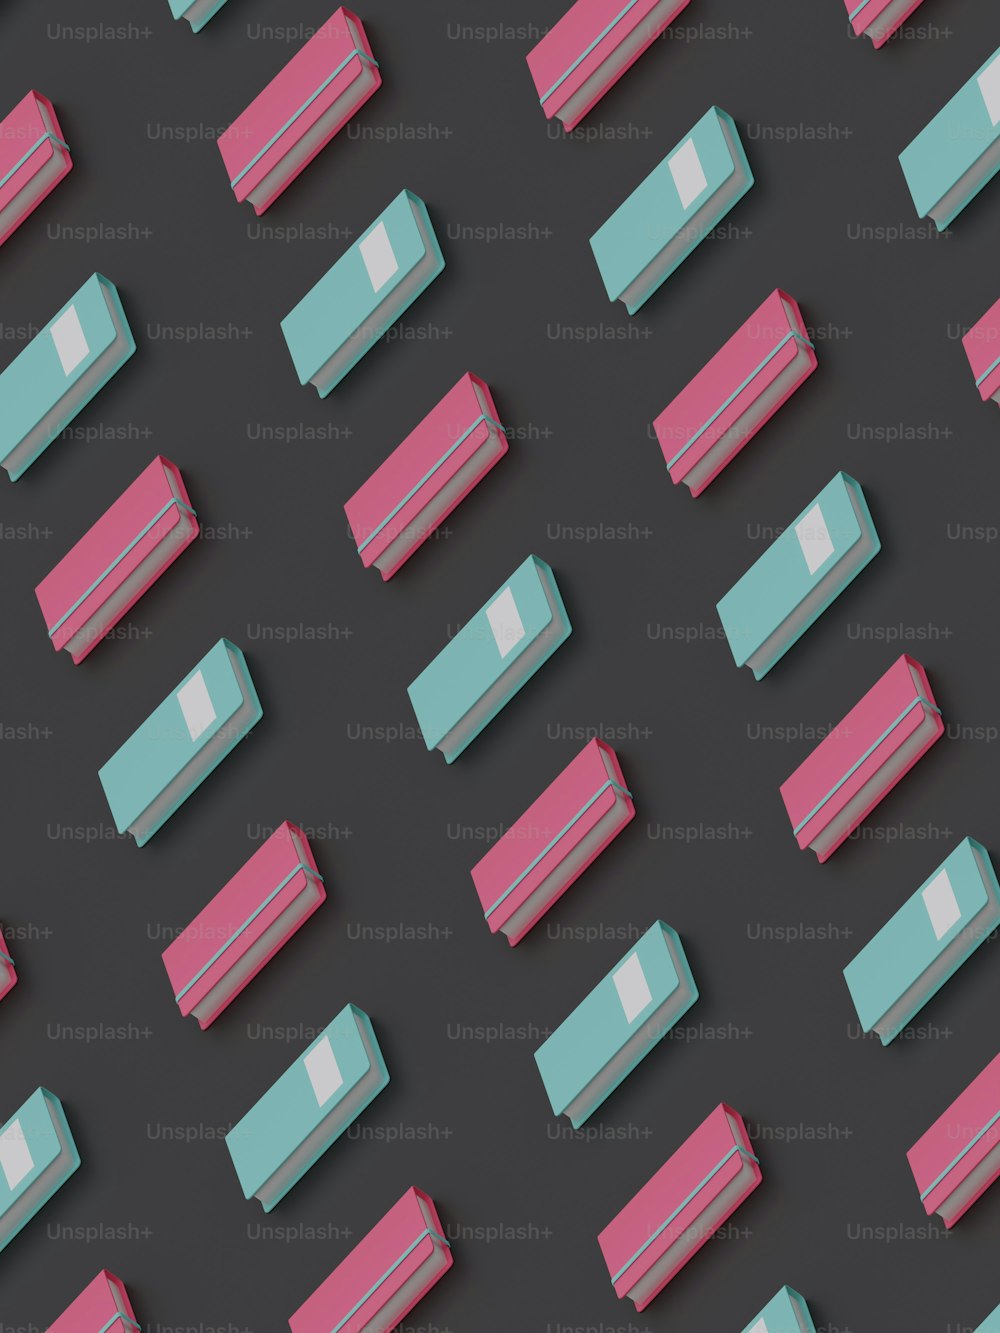 a pattern of pink and blue rectangles on a black background